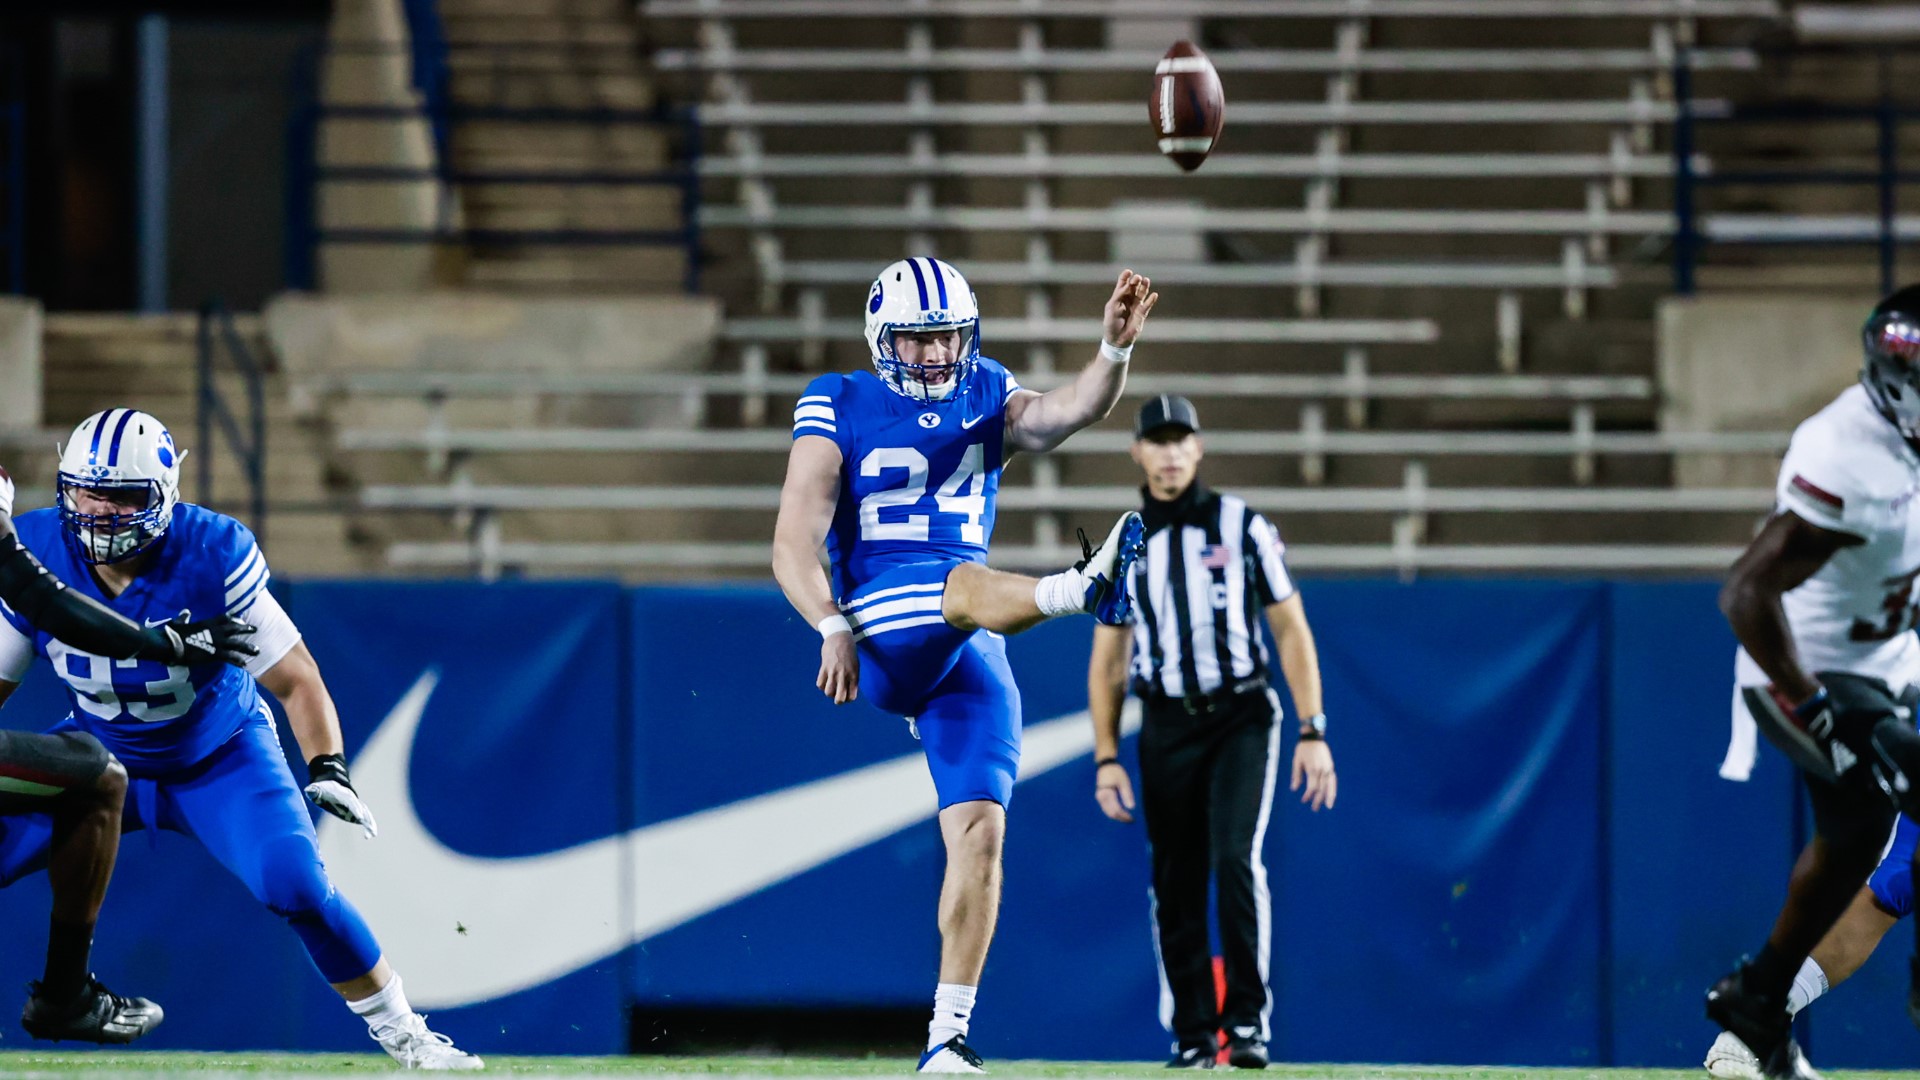 Rehkow is averaging 46.3 yards per punt on 15 punts this season and had a 49 yard fake punt run this past weekend. That's BYU's longest run of the season thus far.